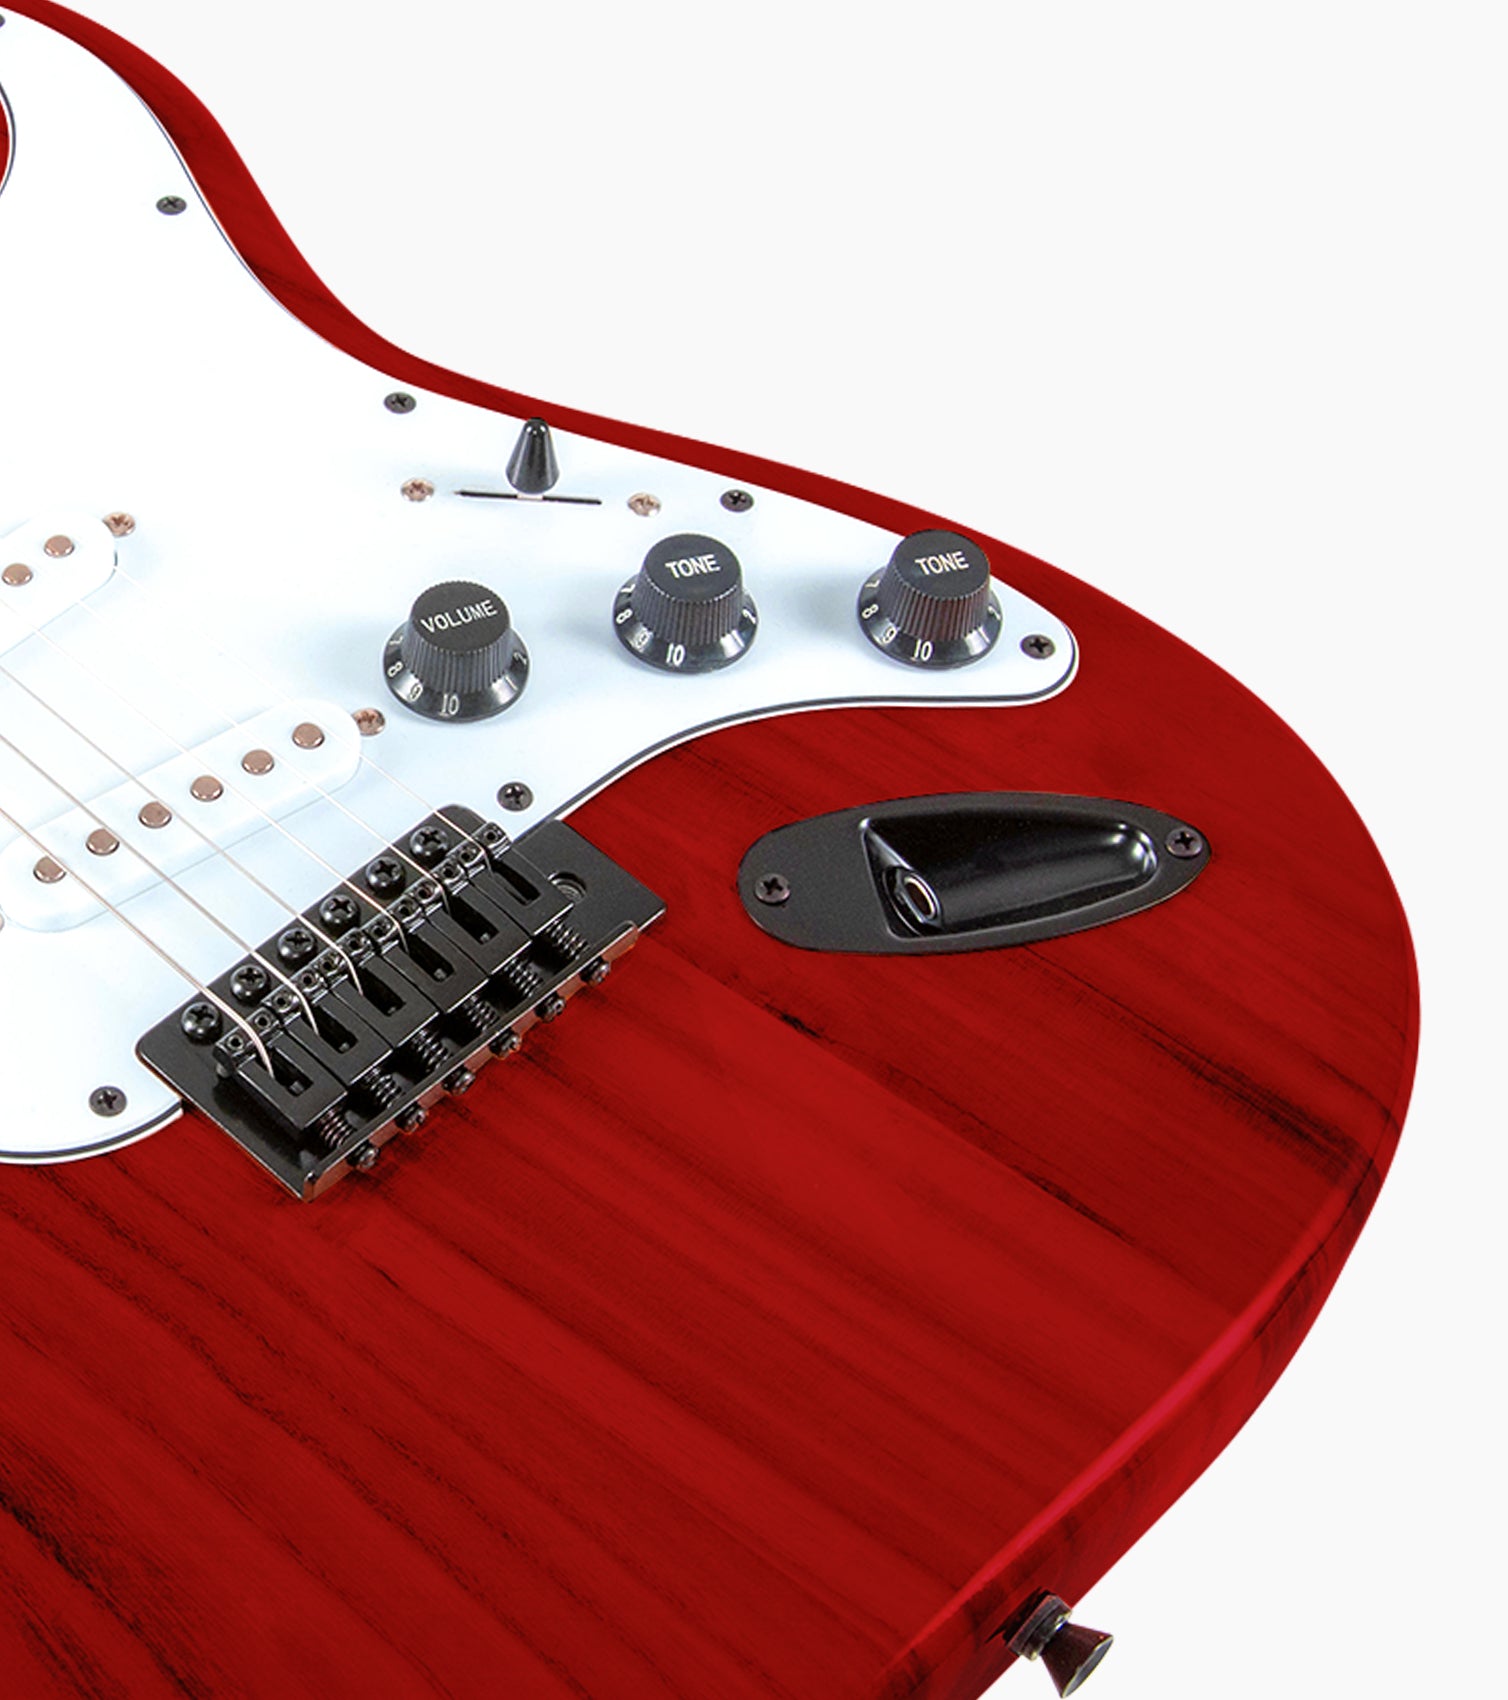 close-up of Red double-cutaway beginner electric guitar